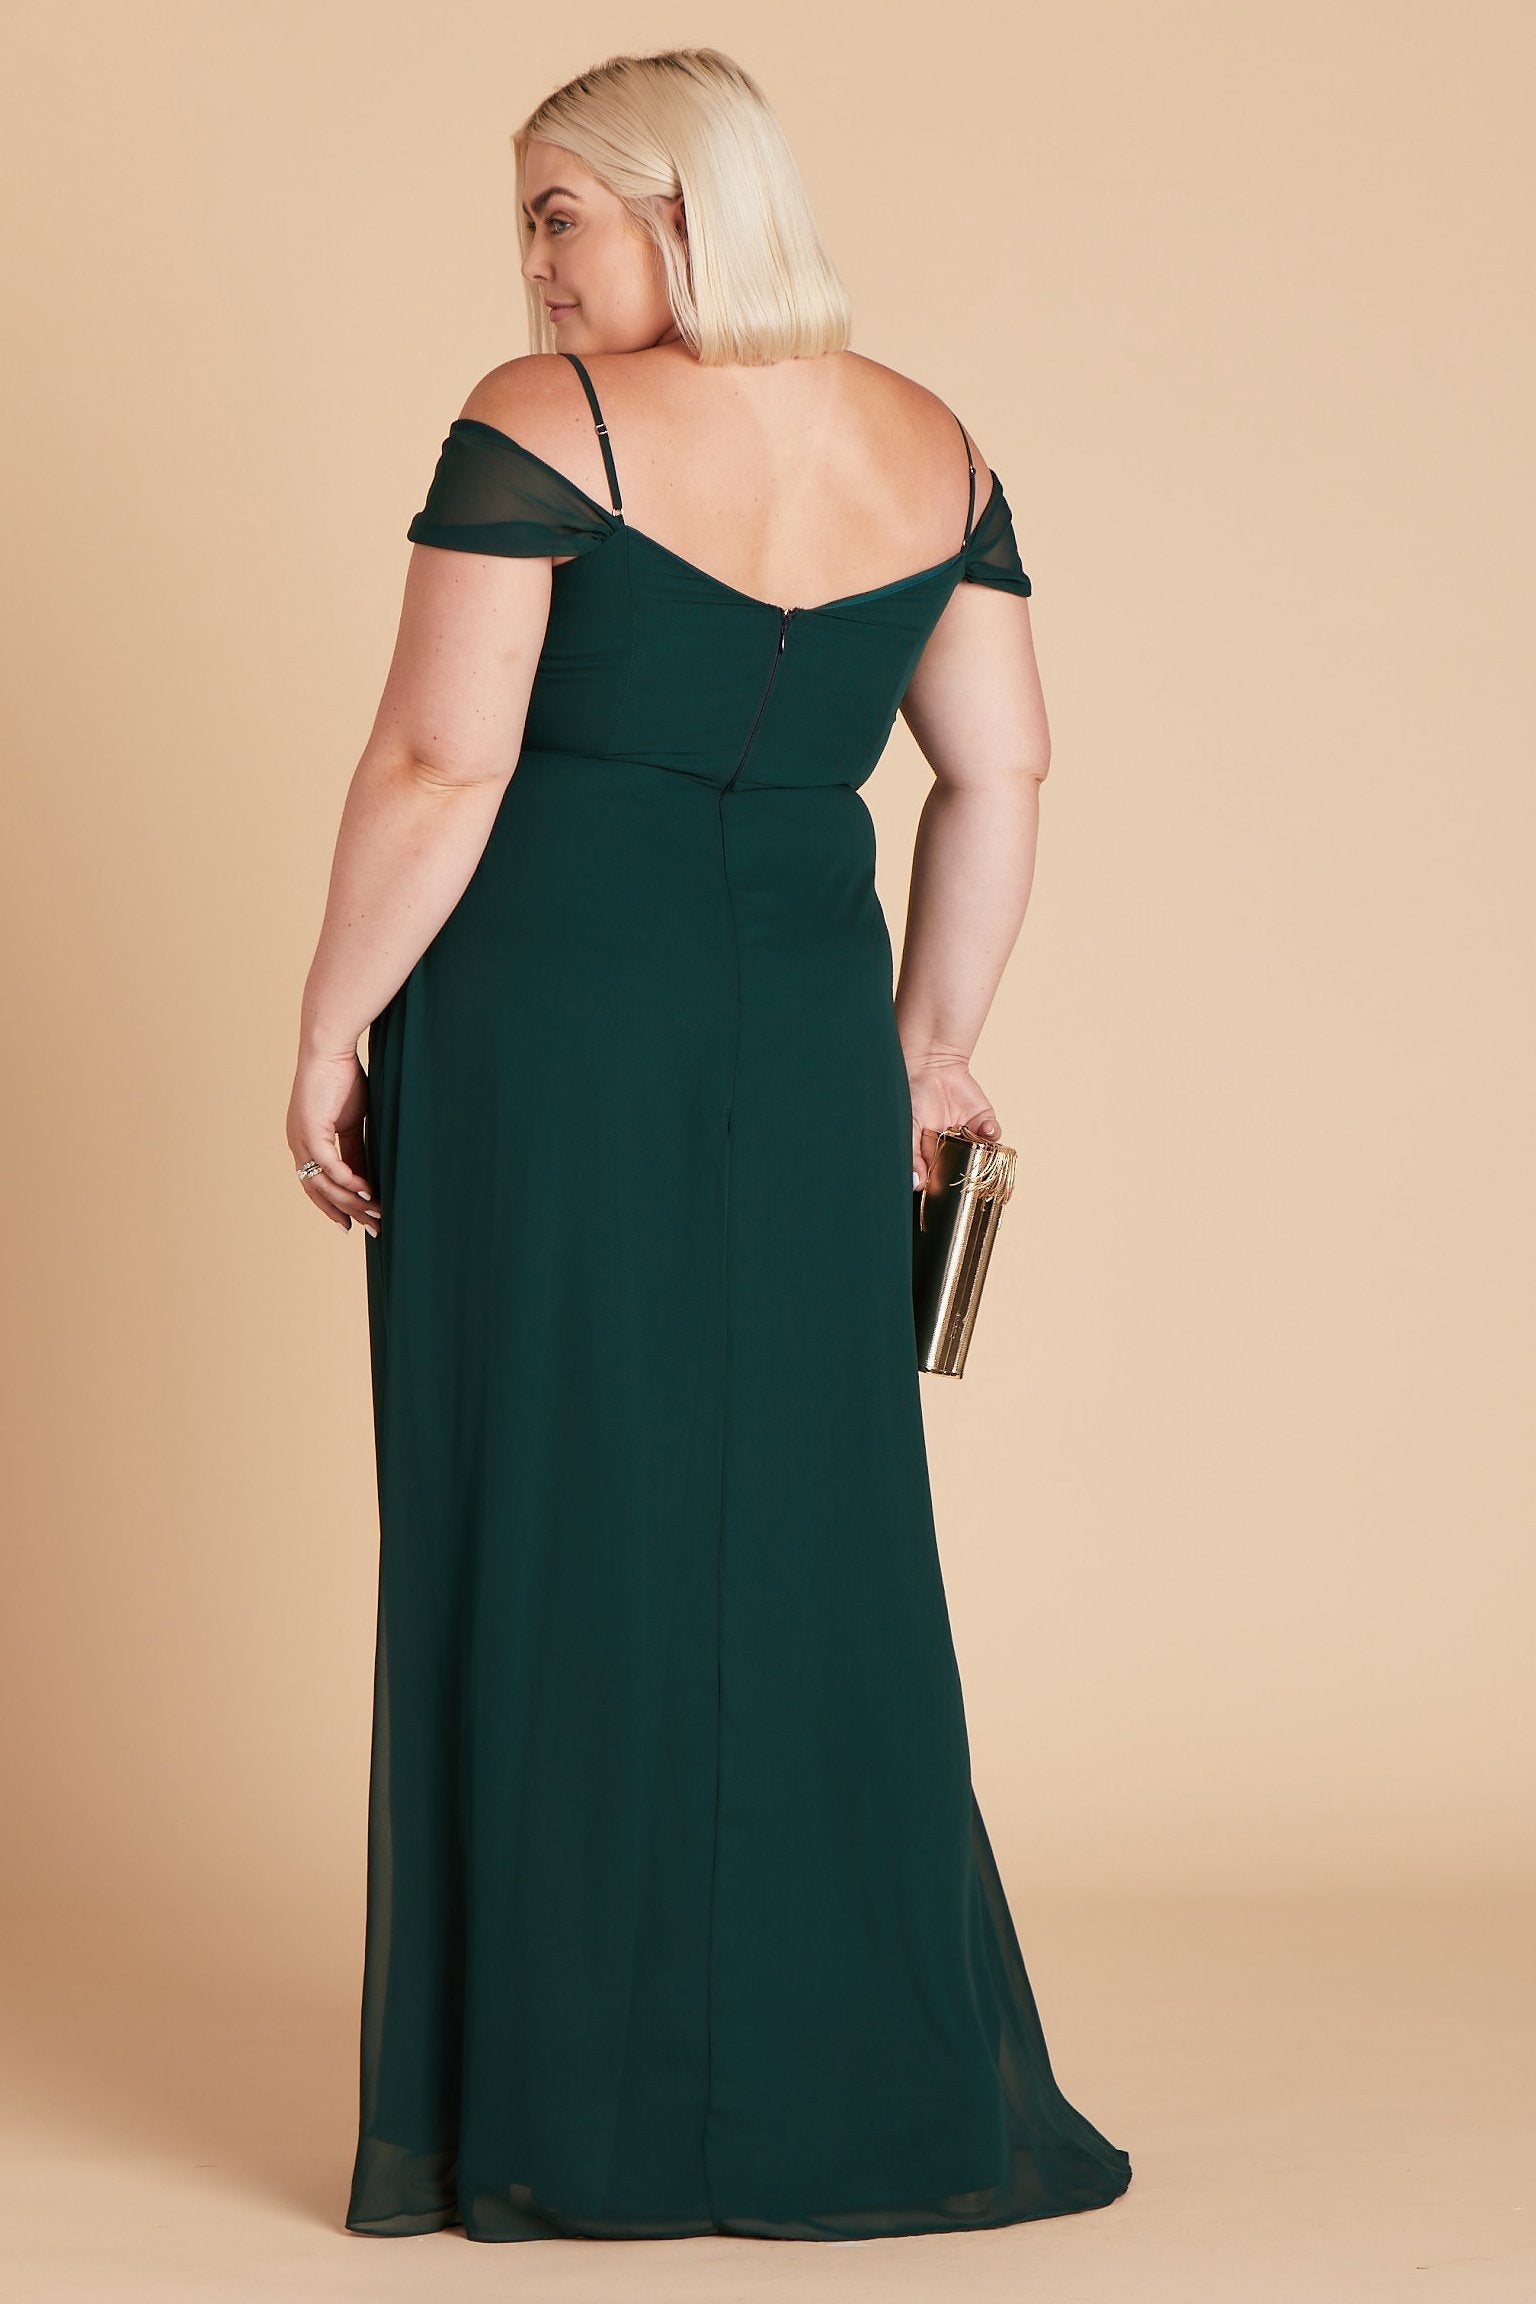 Spence convertible plus size bridesmaid dress in emerald green chiffon by Birdy Grey, back view